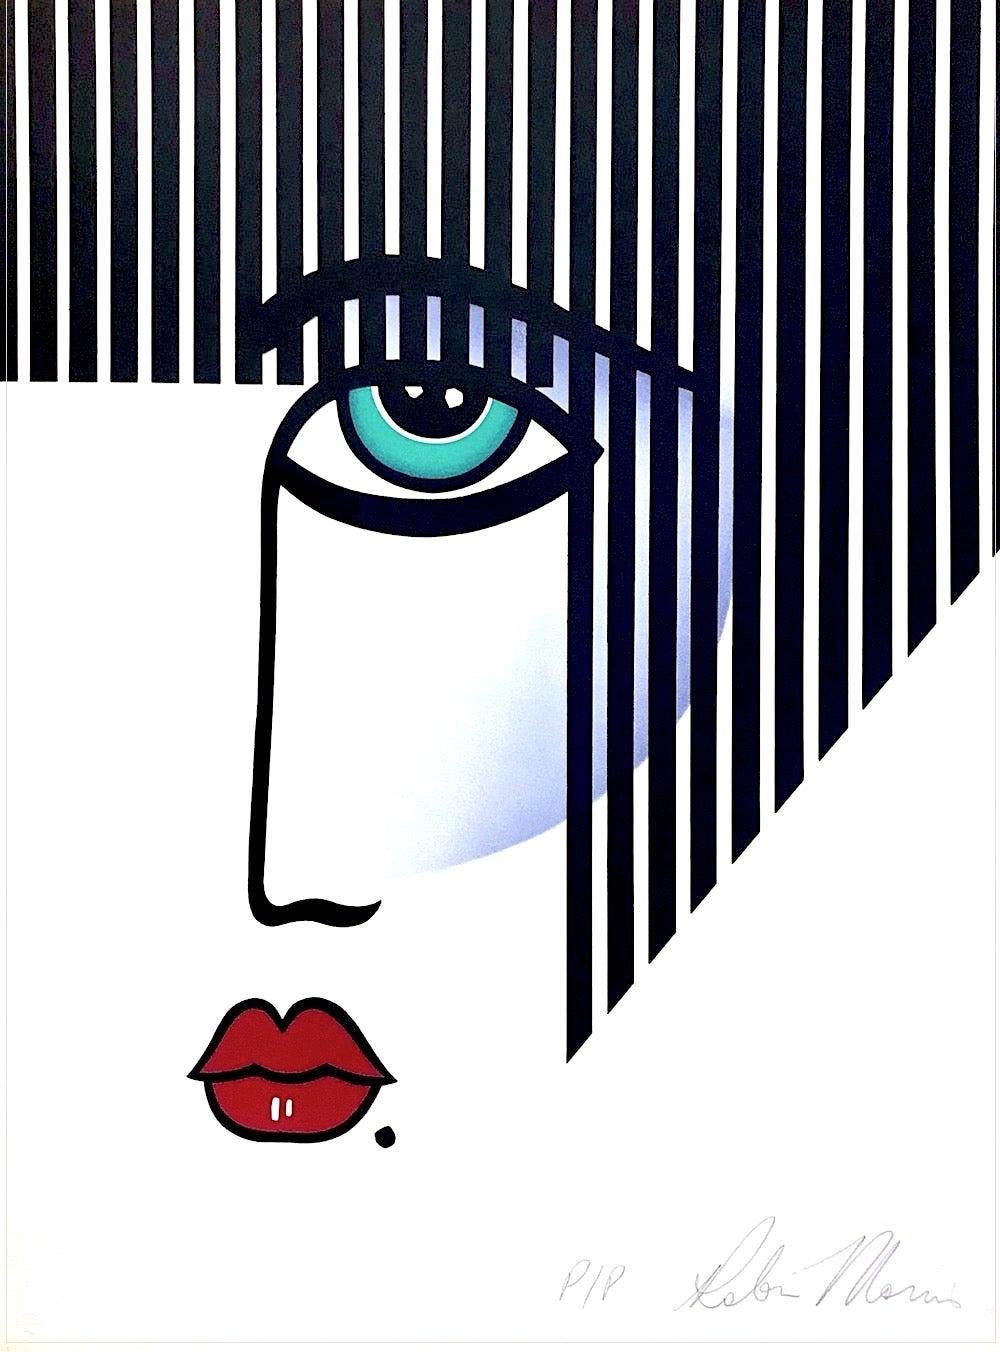 Robin Morris Abstract Print - NEW DECO Signed Lithograph, Modern Portrait Bold Stripe Hair, Red Lips, Art Deco